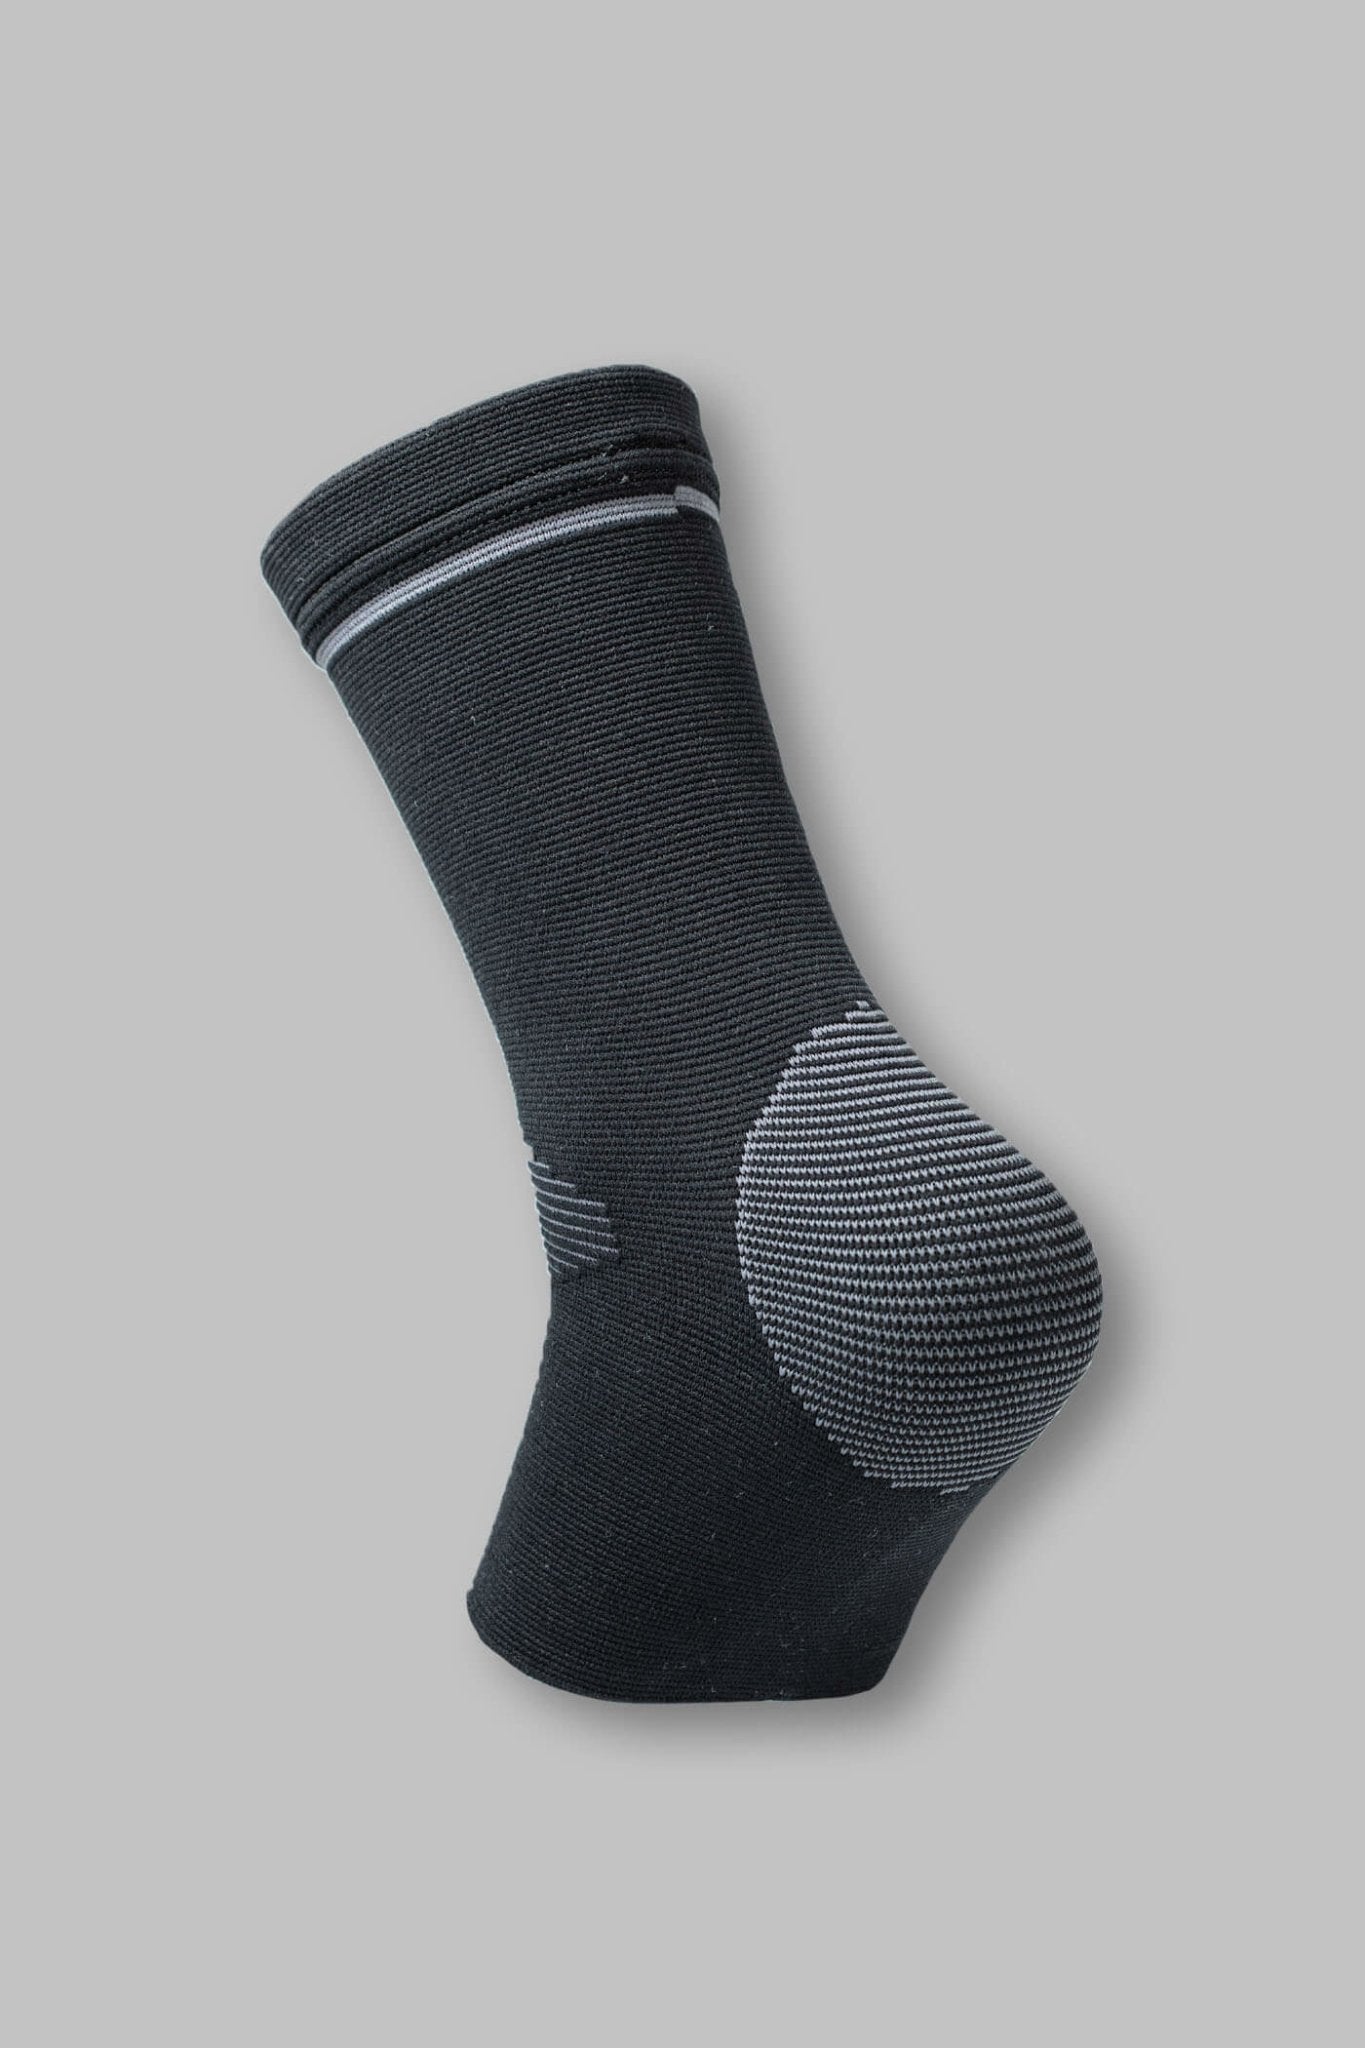 Ankle Support in Black - Gain The Edge US